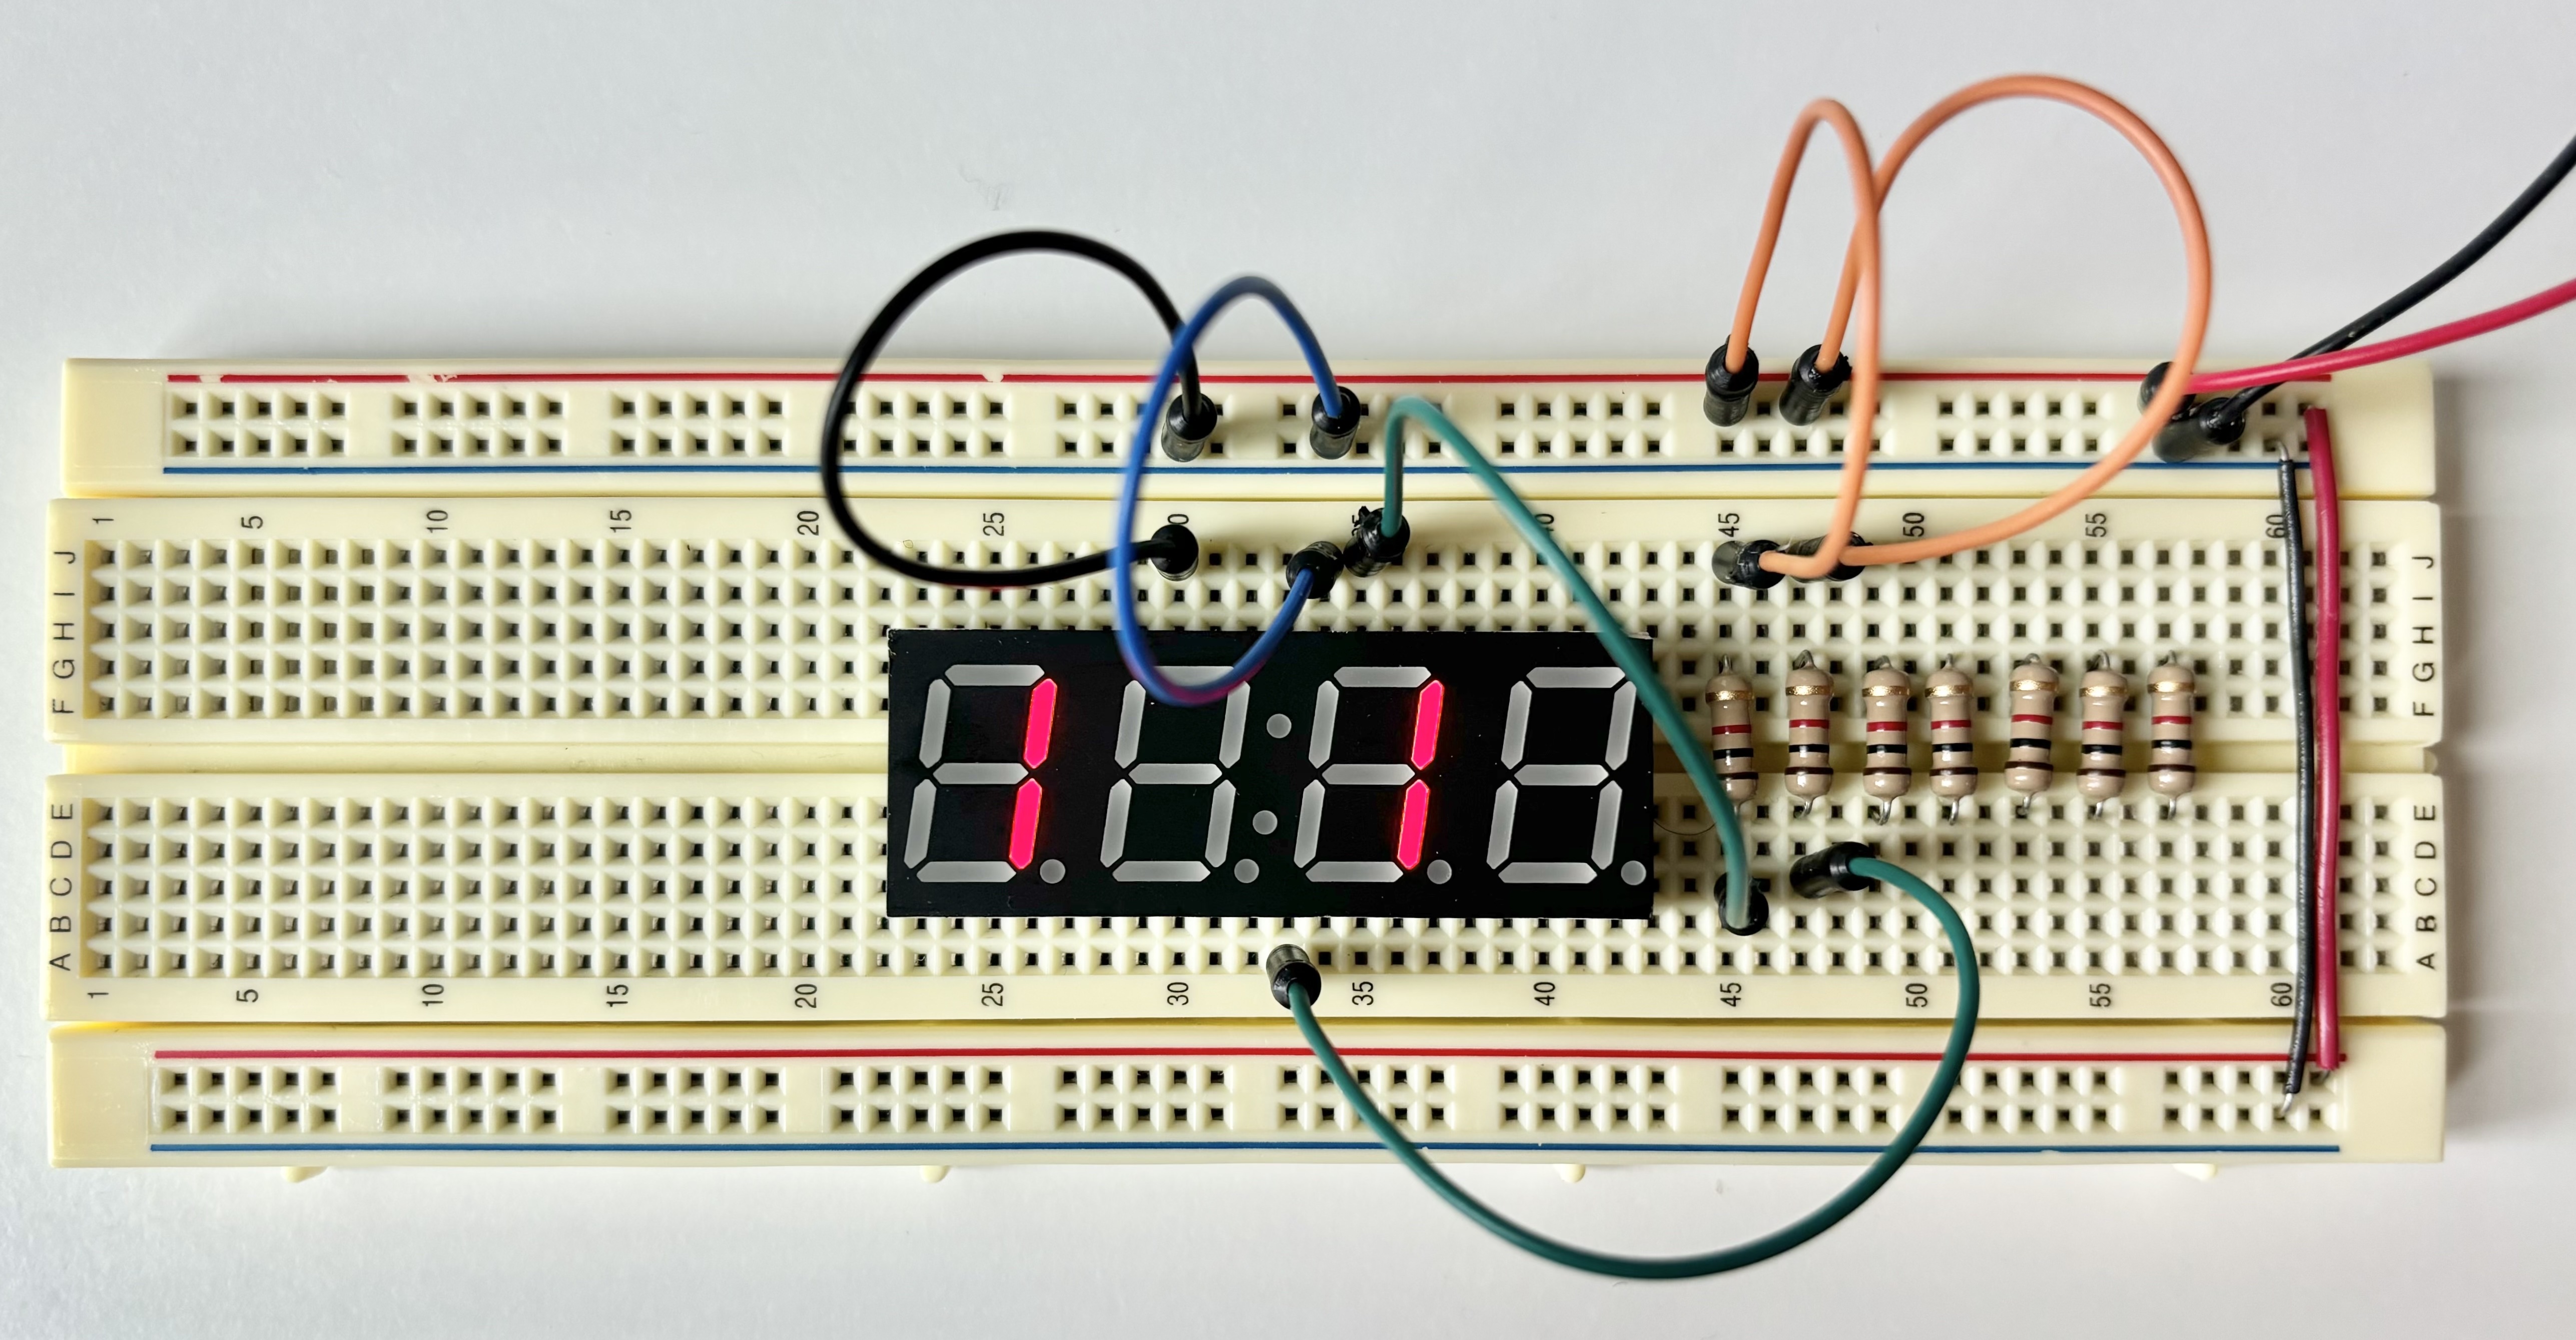 Test circuit for 1-1-